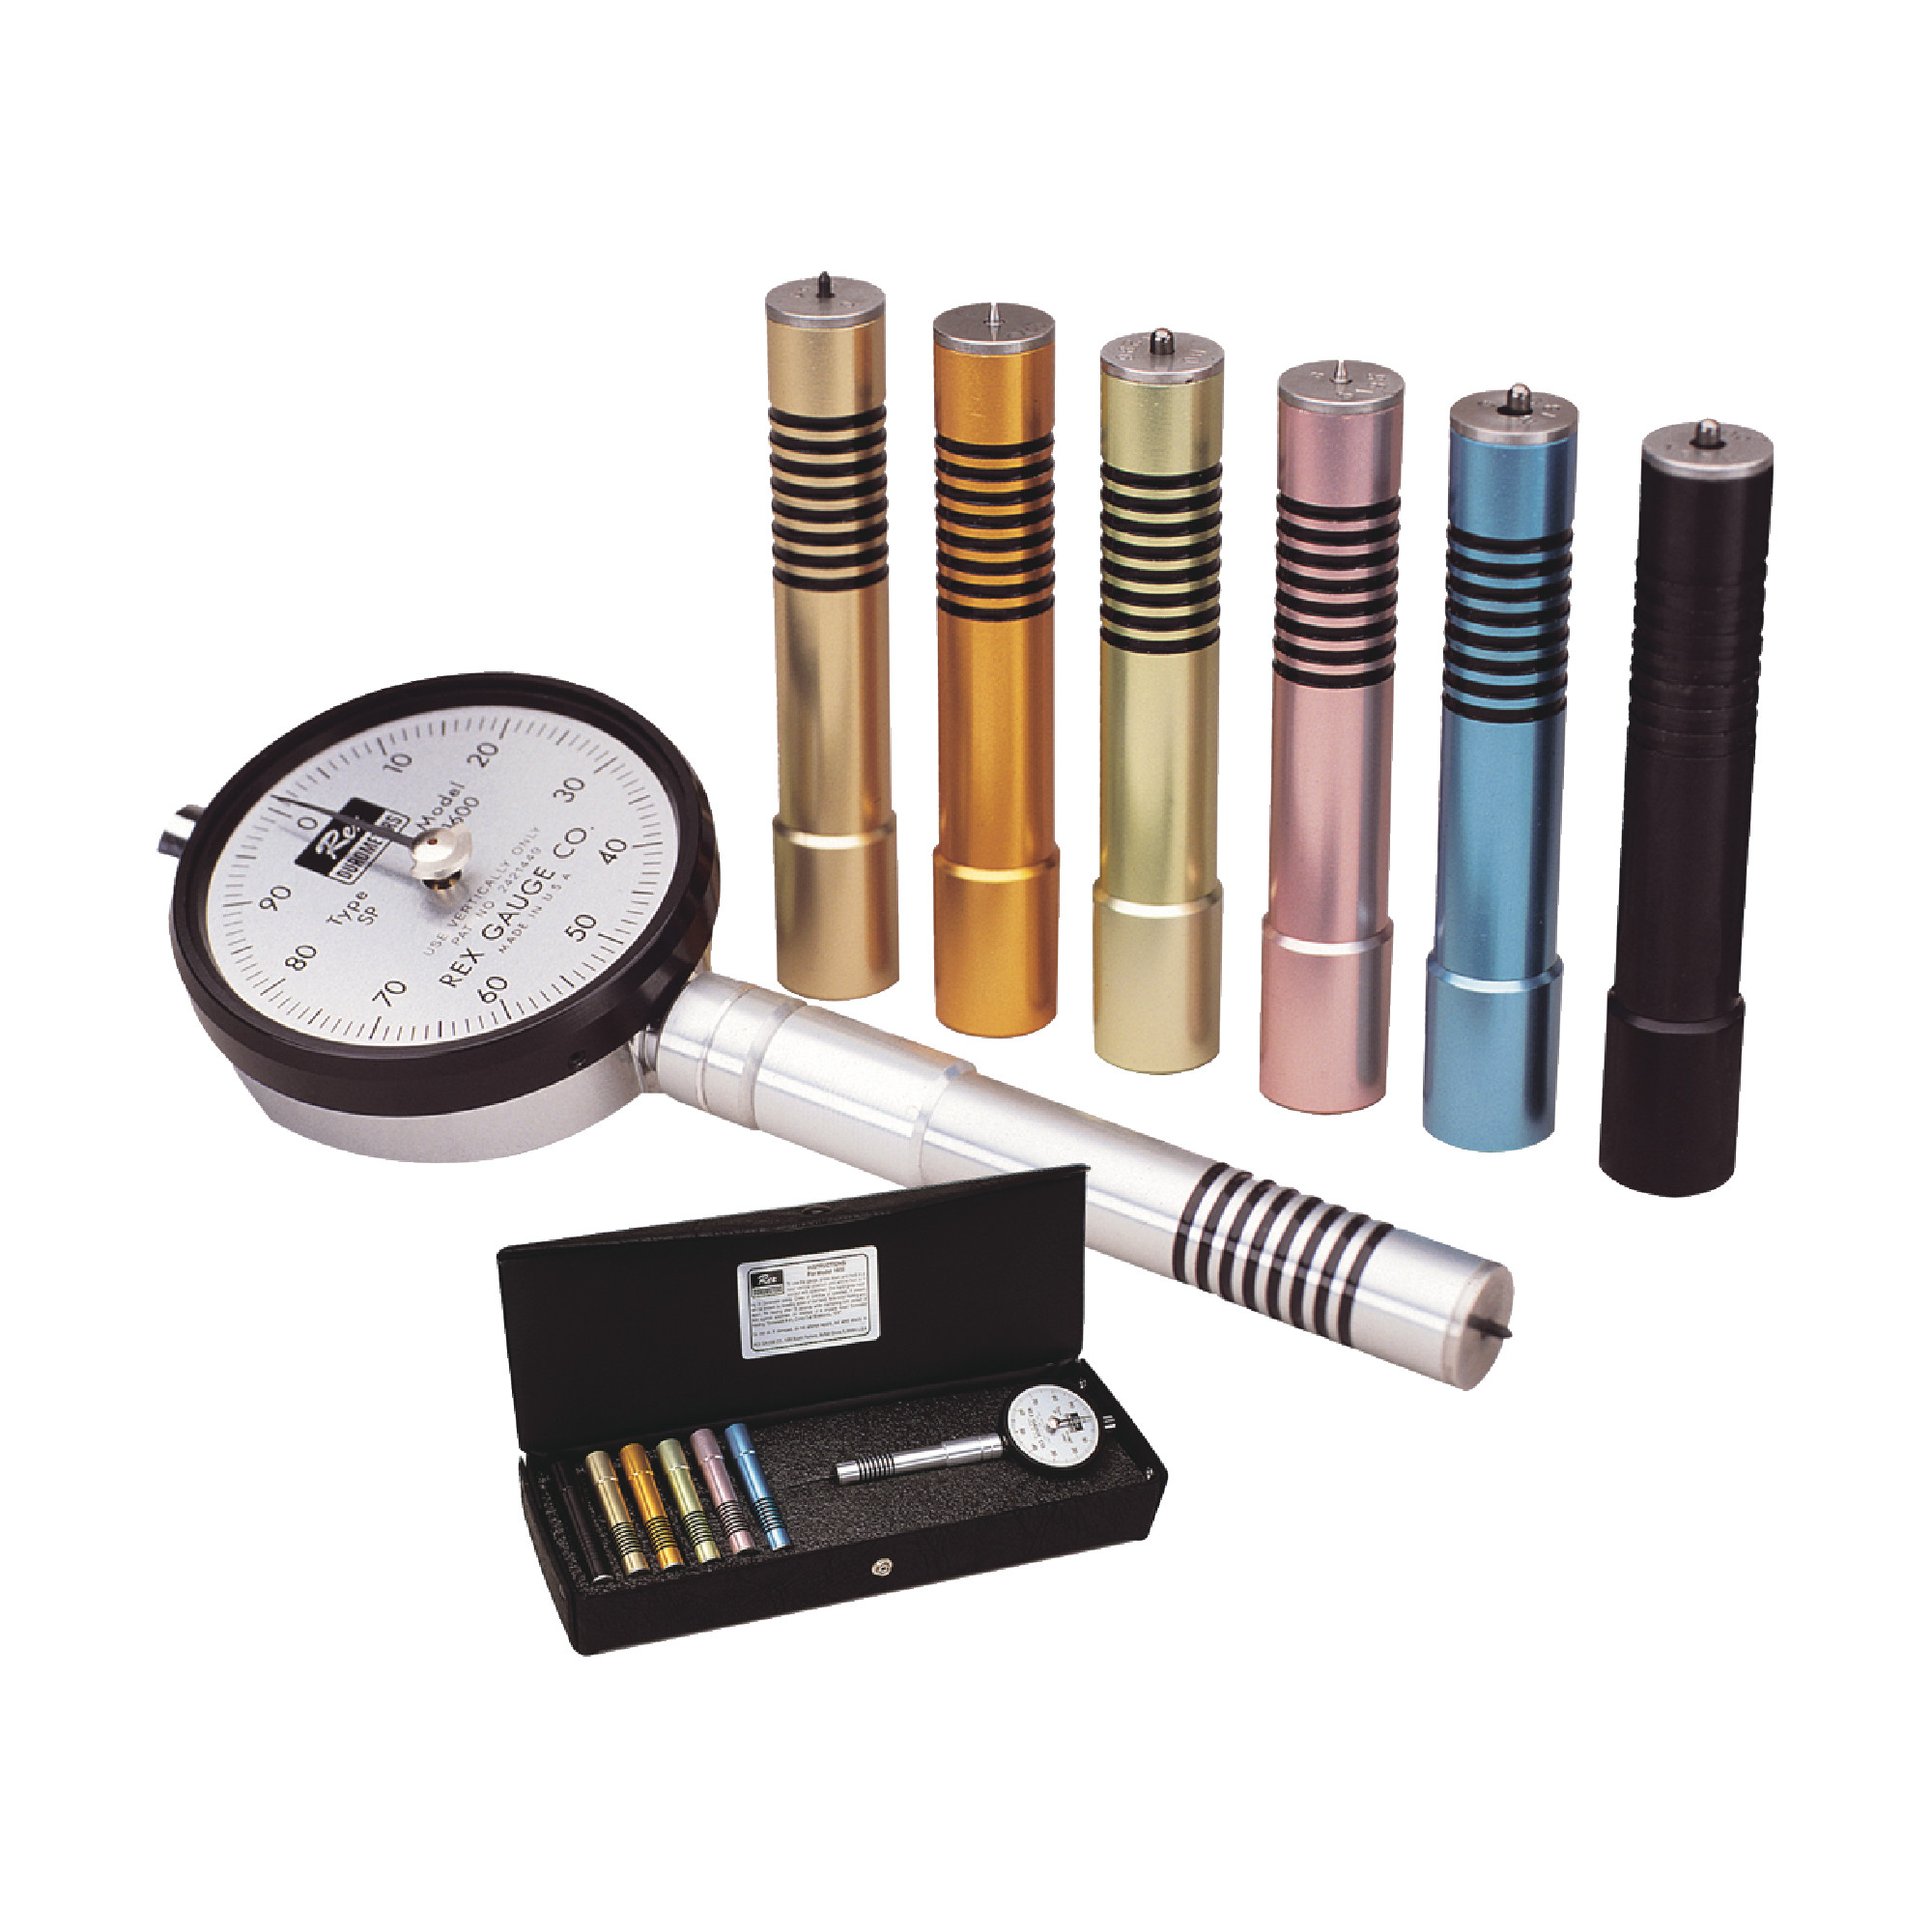 Multi-Scale Complete Dial Durometer Kit